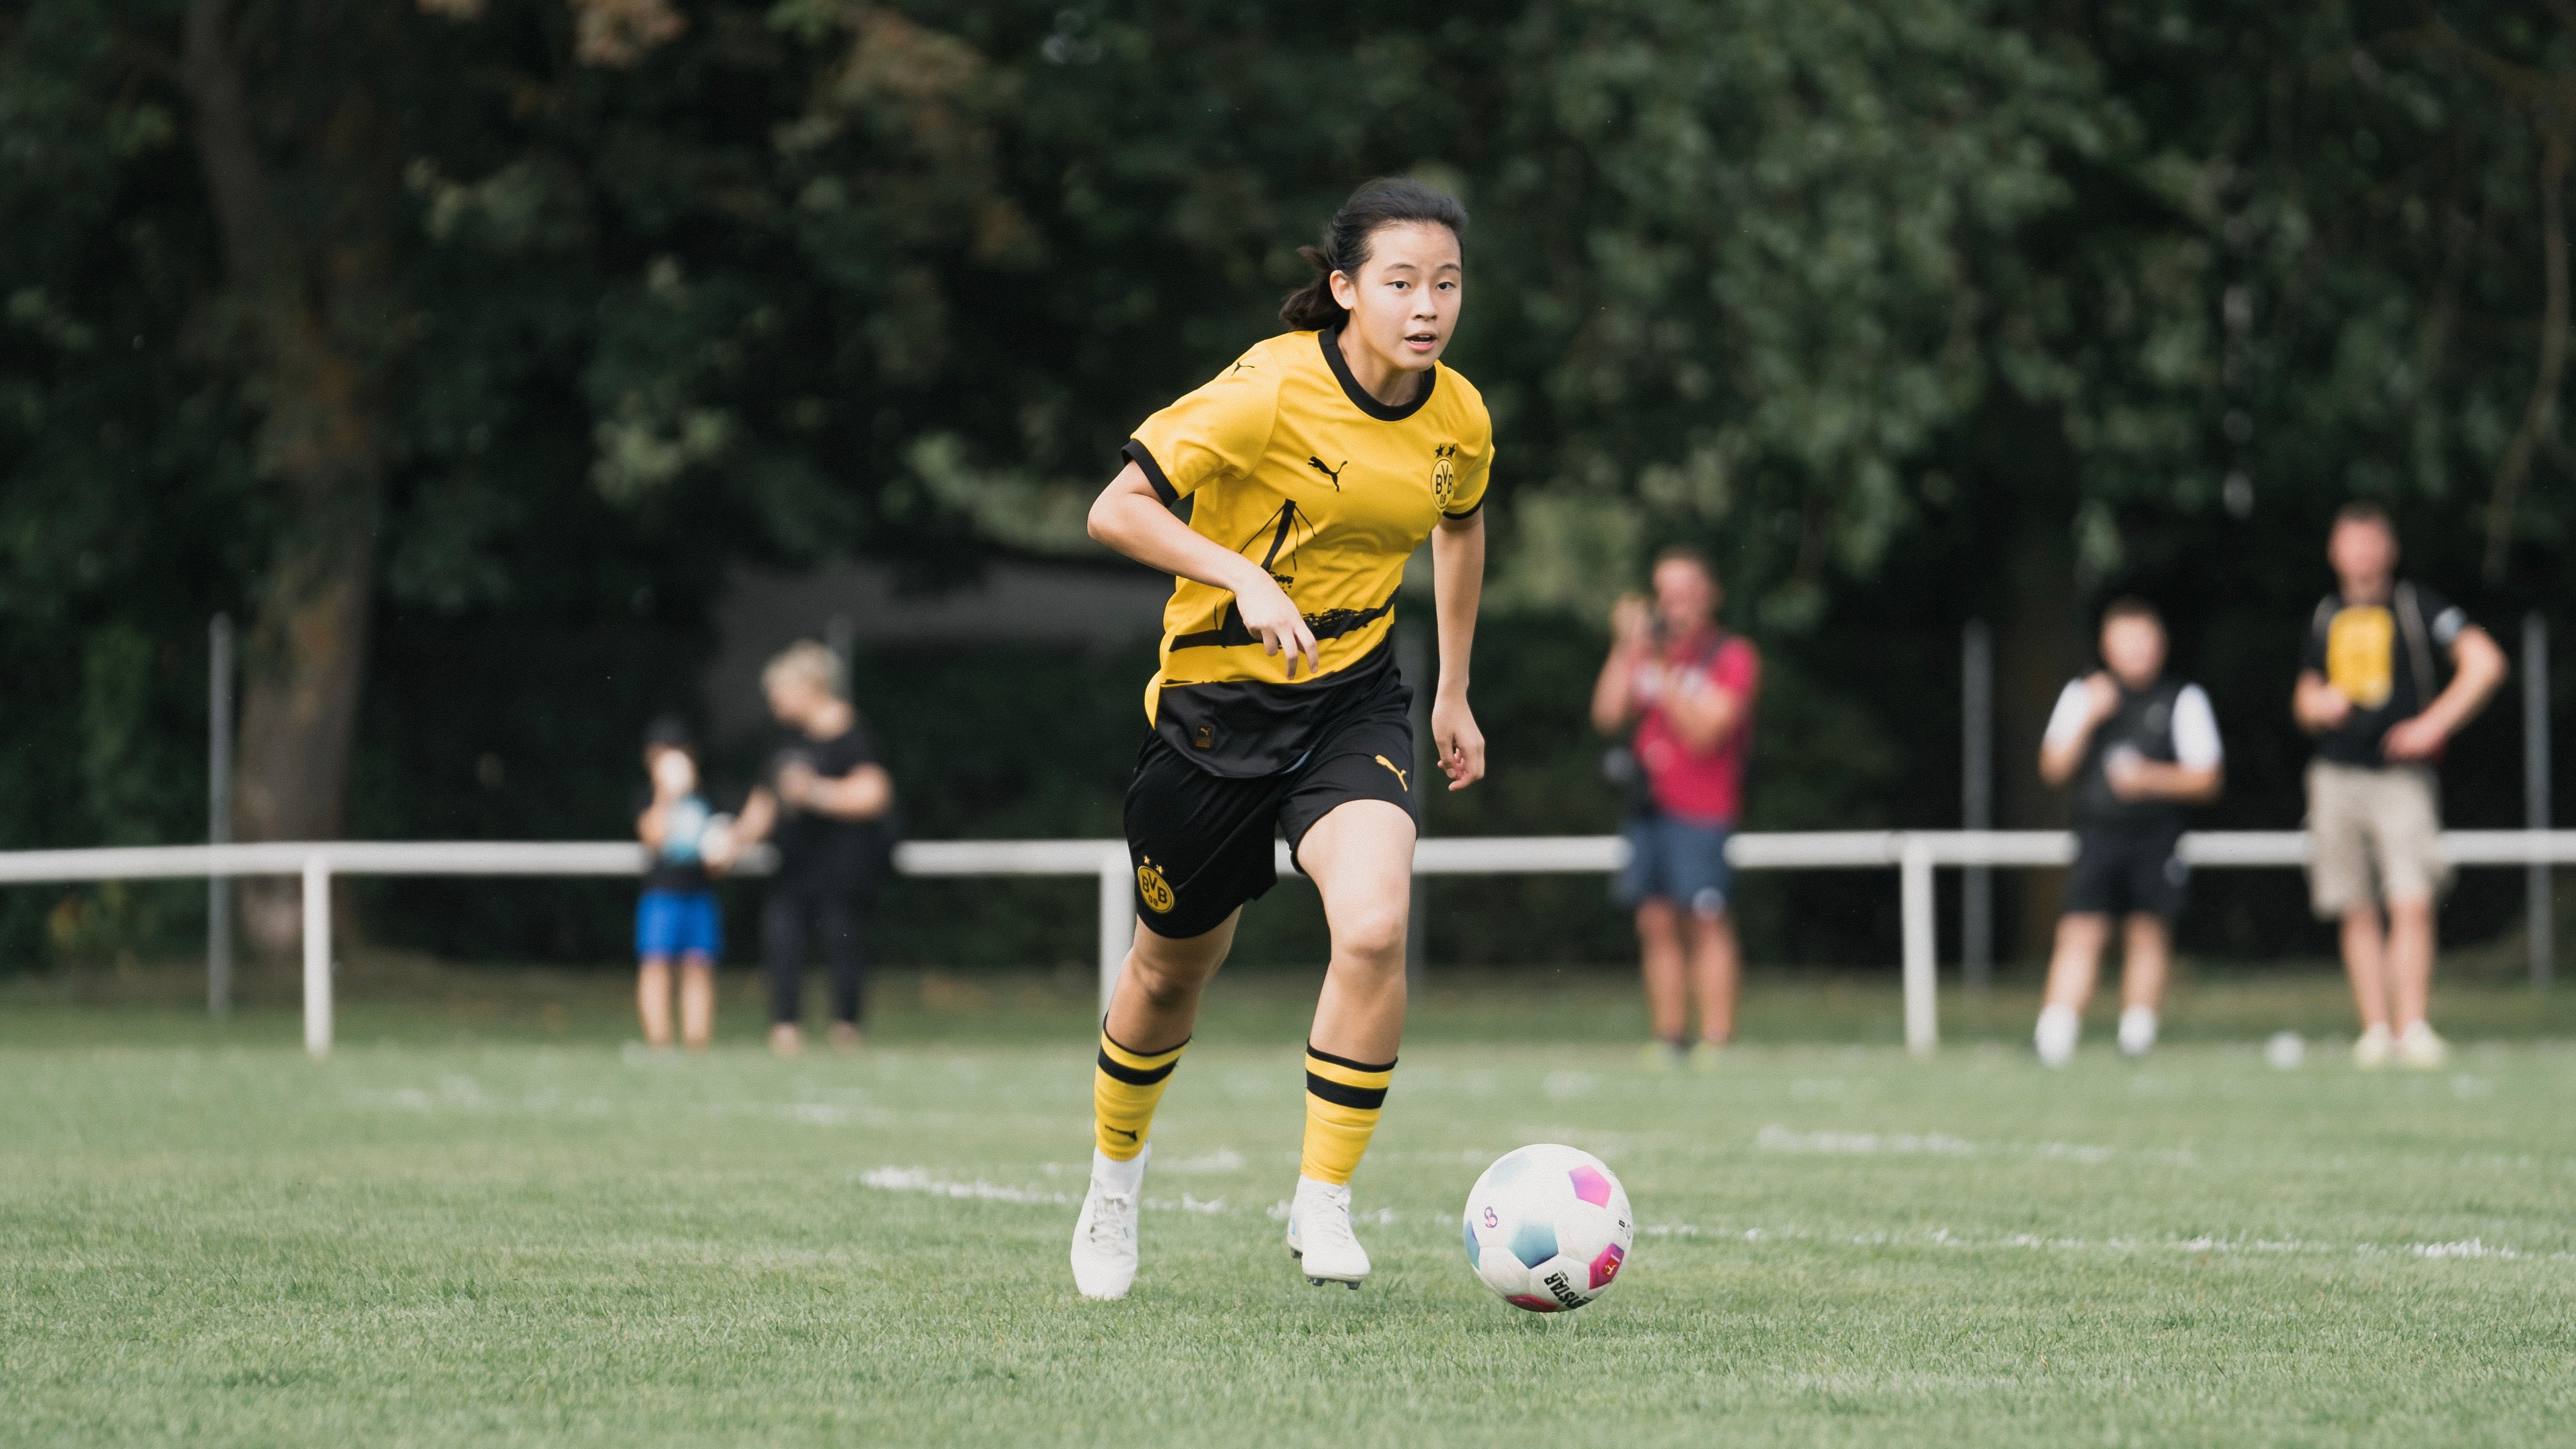 TeamSG's Danelle Tan's Football Career is off to a Flying Start in Germany